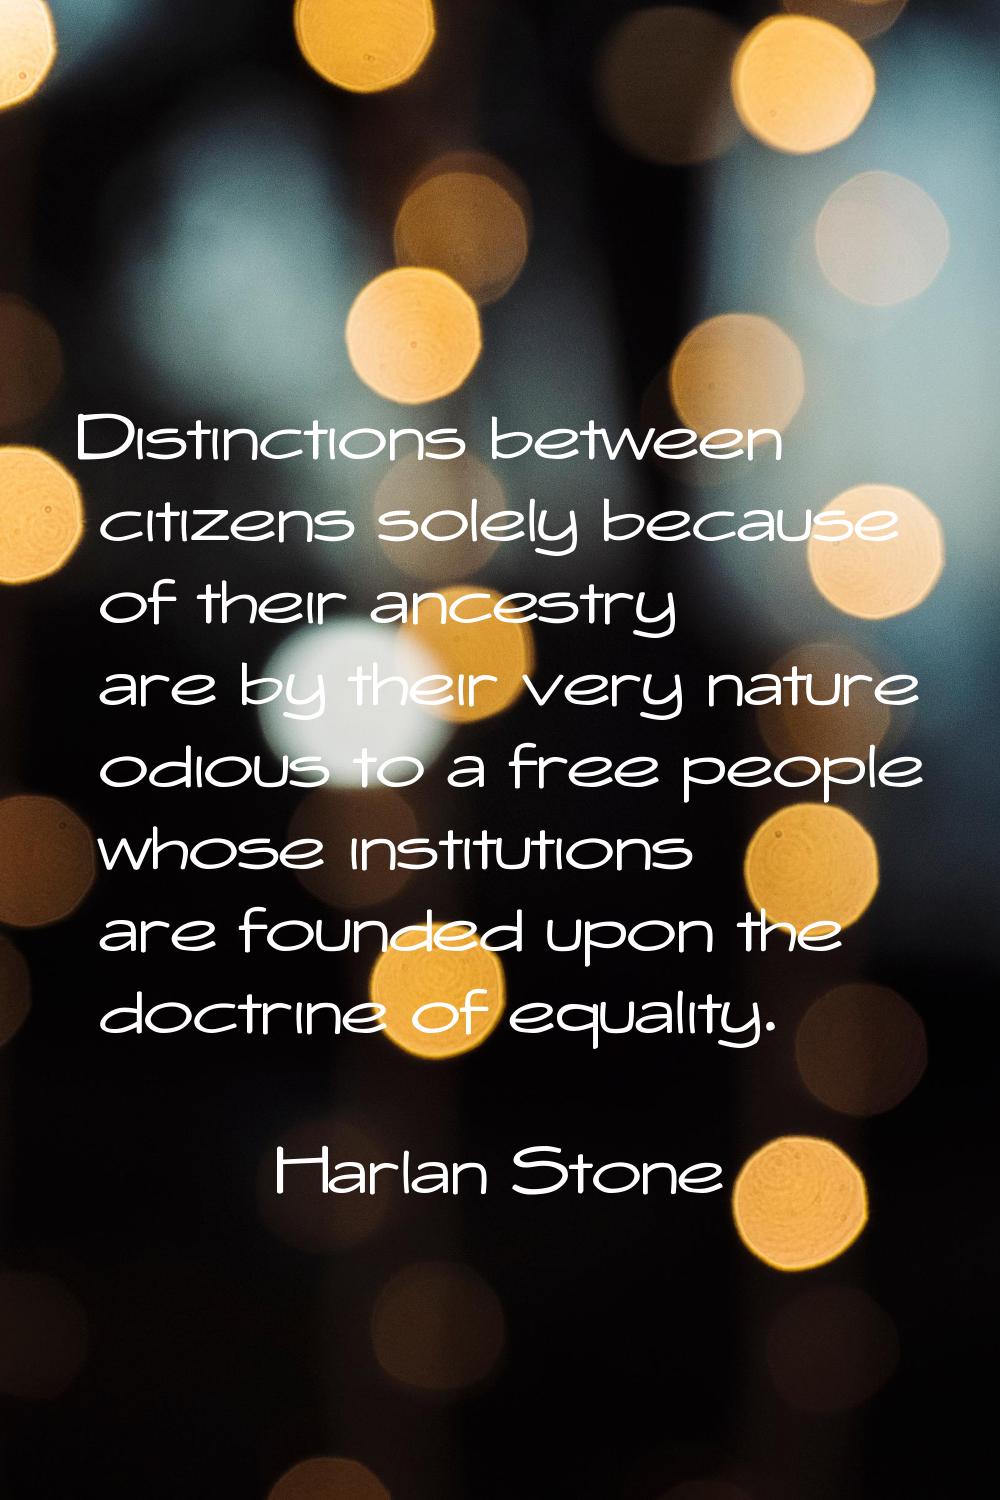 Distinctions between citizens solely because of their ancestry are by their very nature odious to a